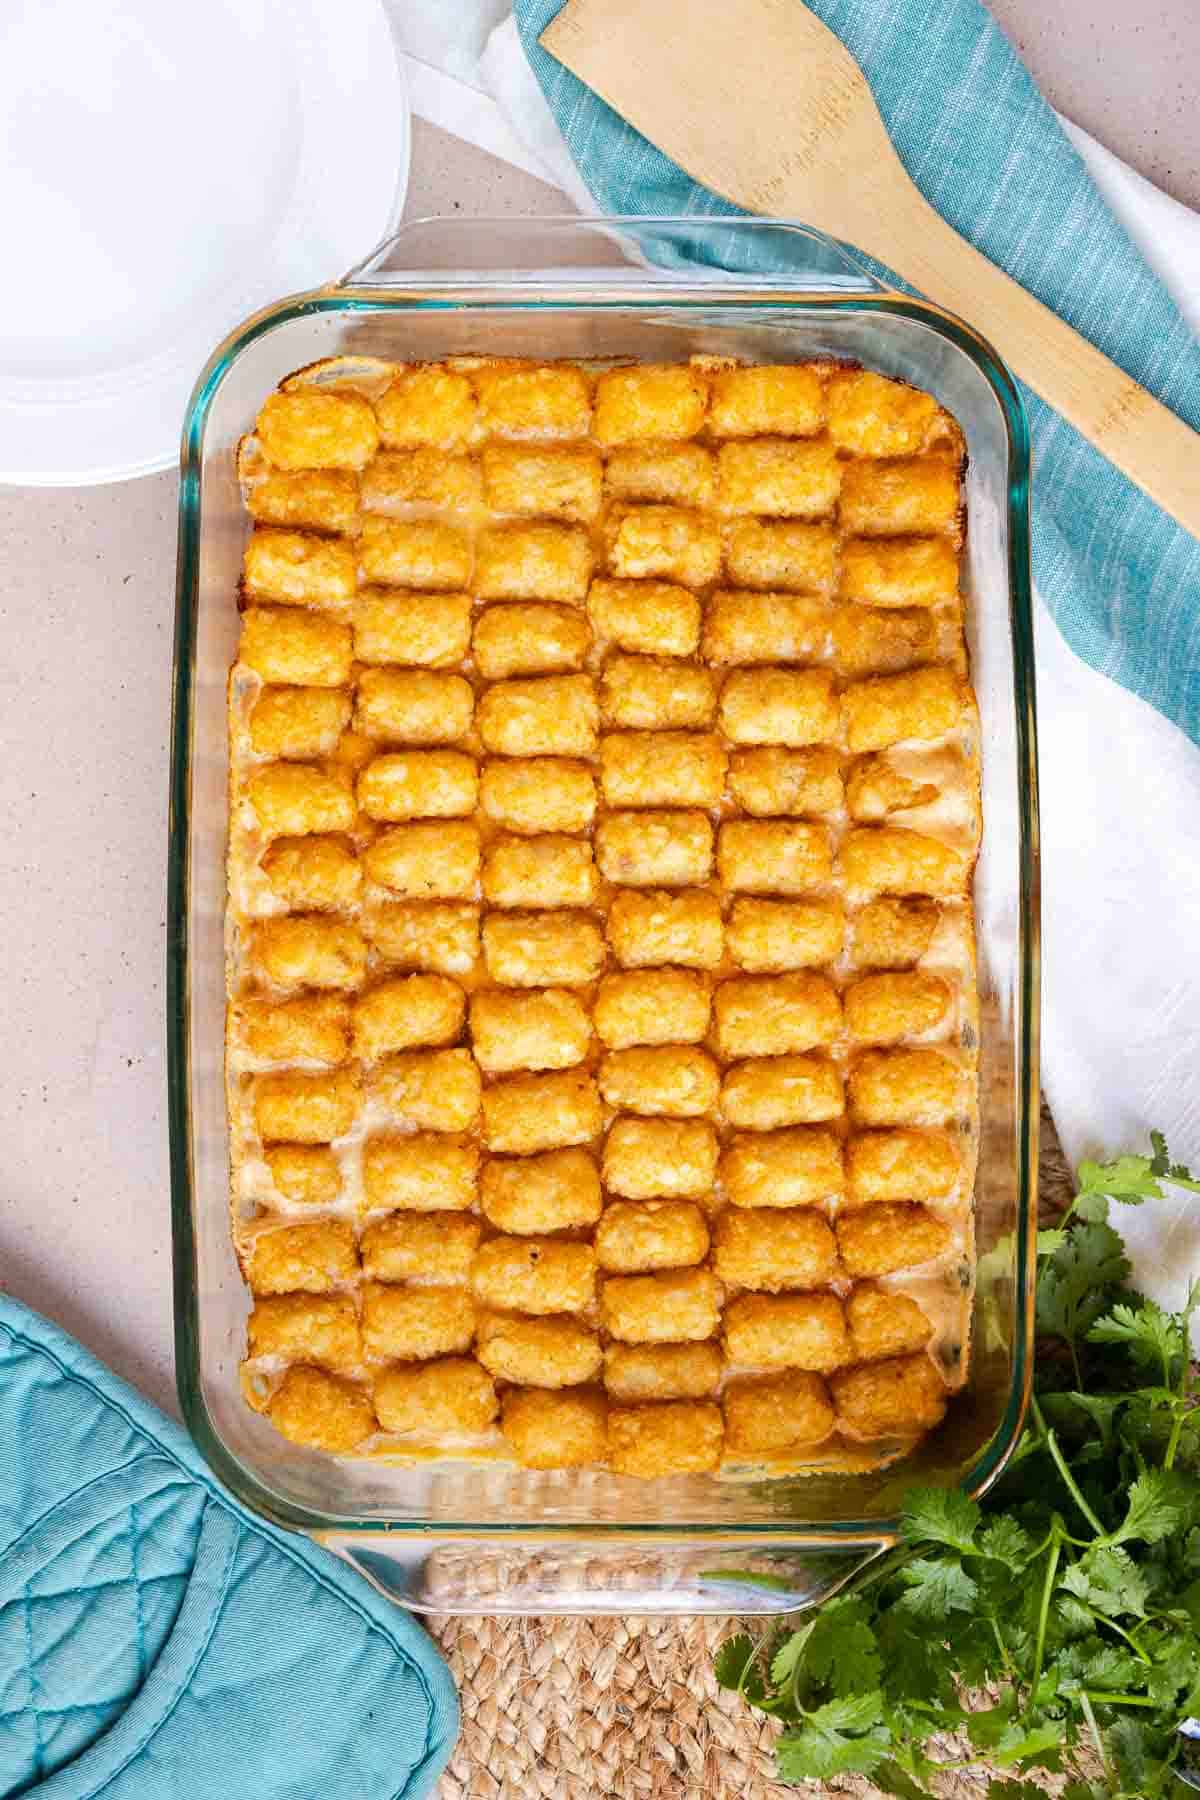 The casserole is baked until the tater tots are golden brown and the casserole filling is bubbling.